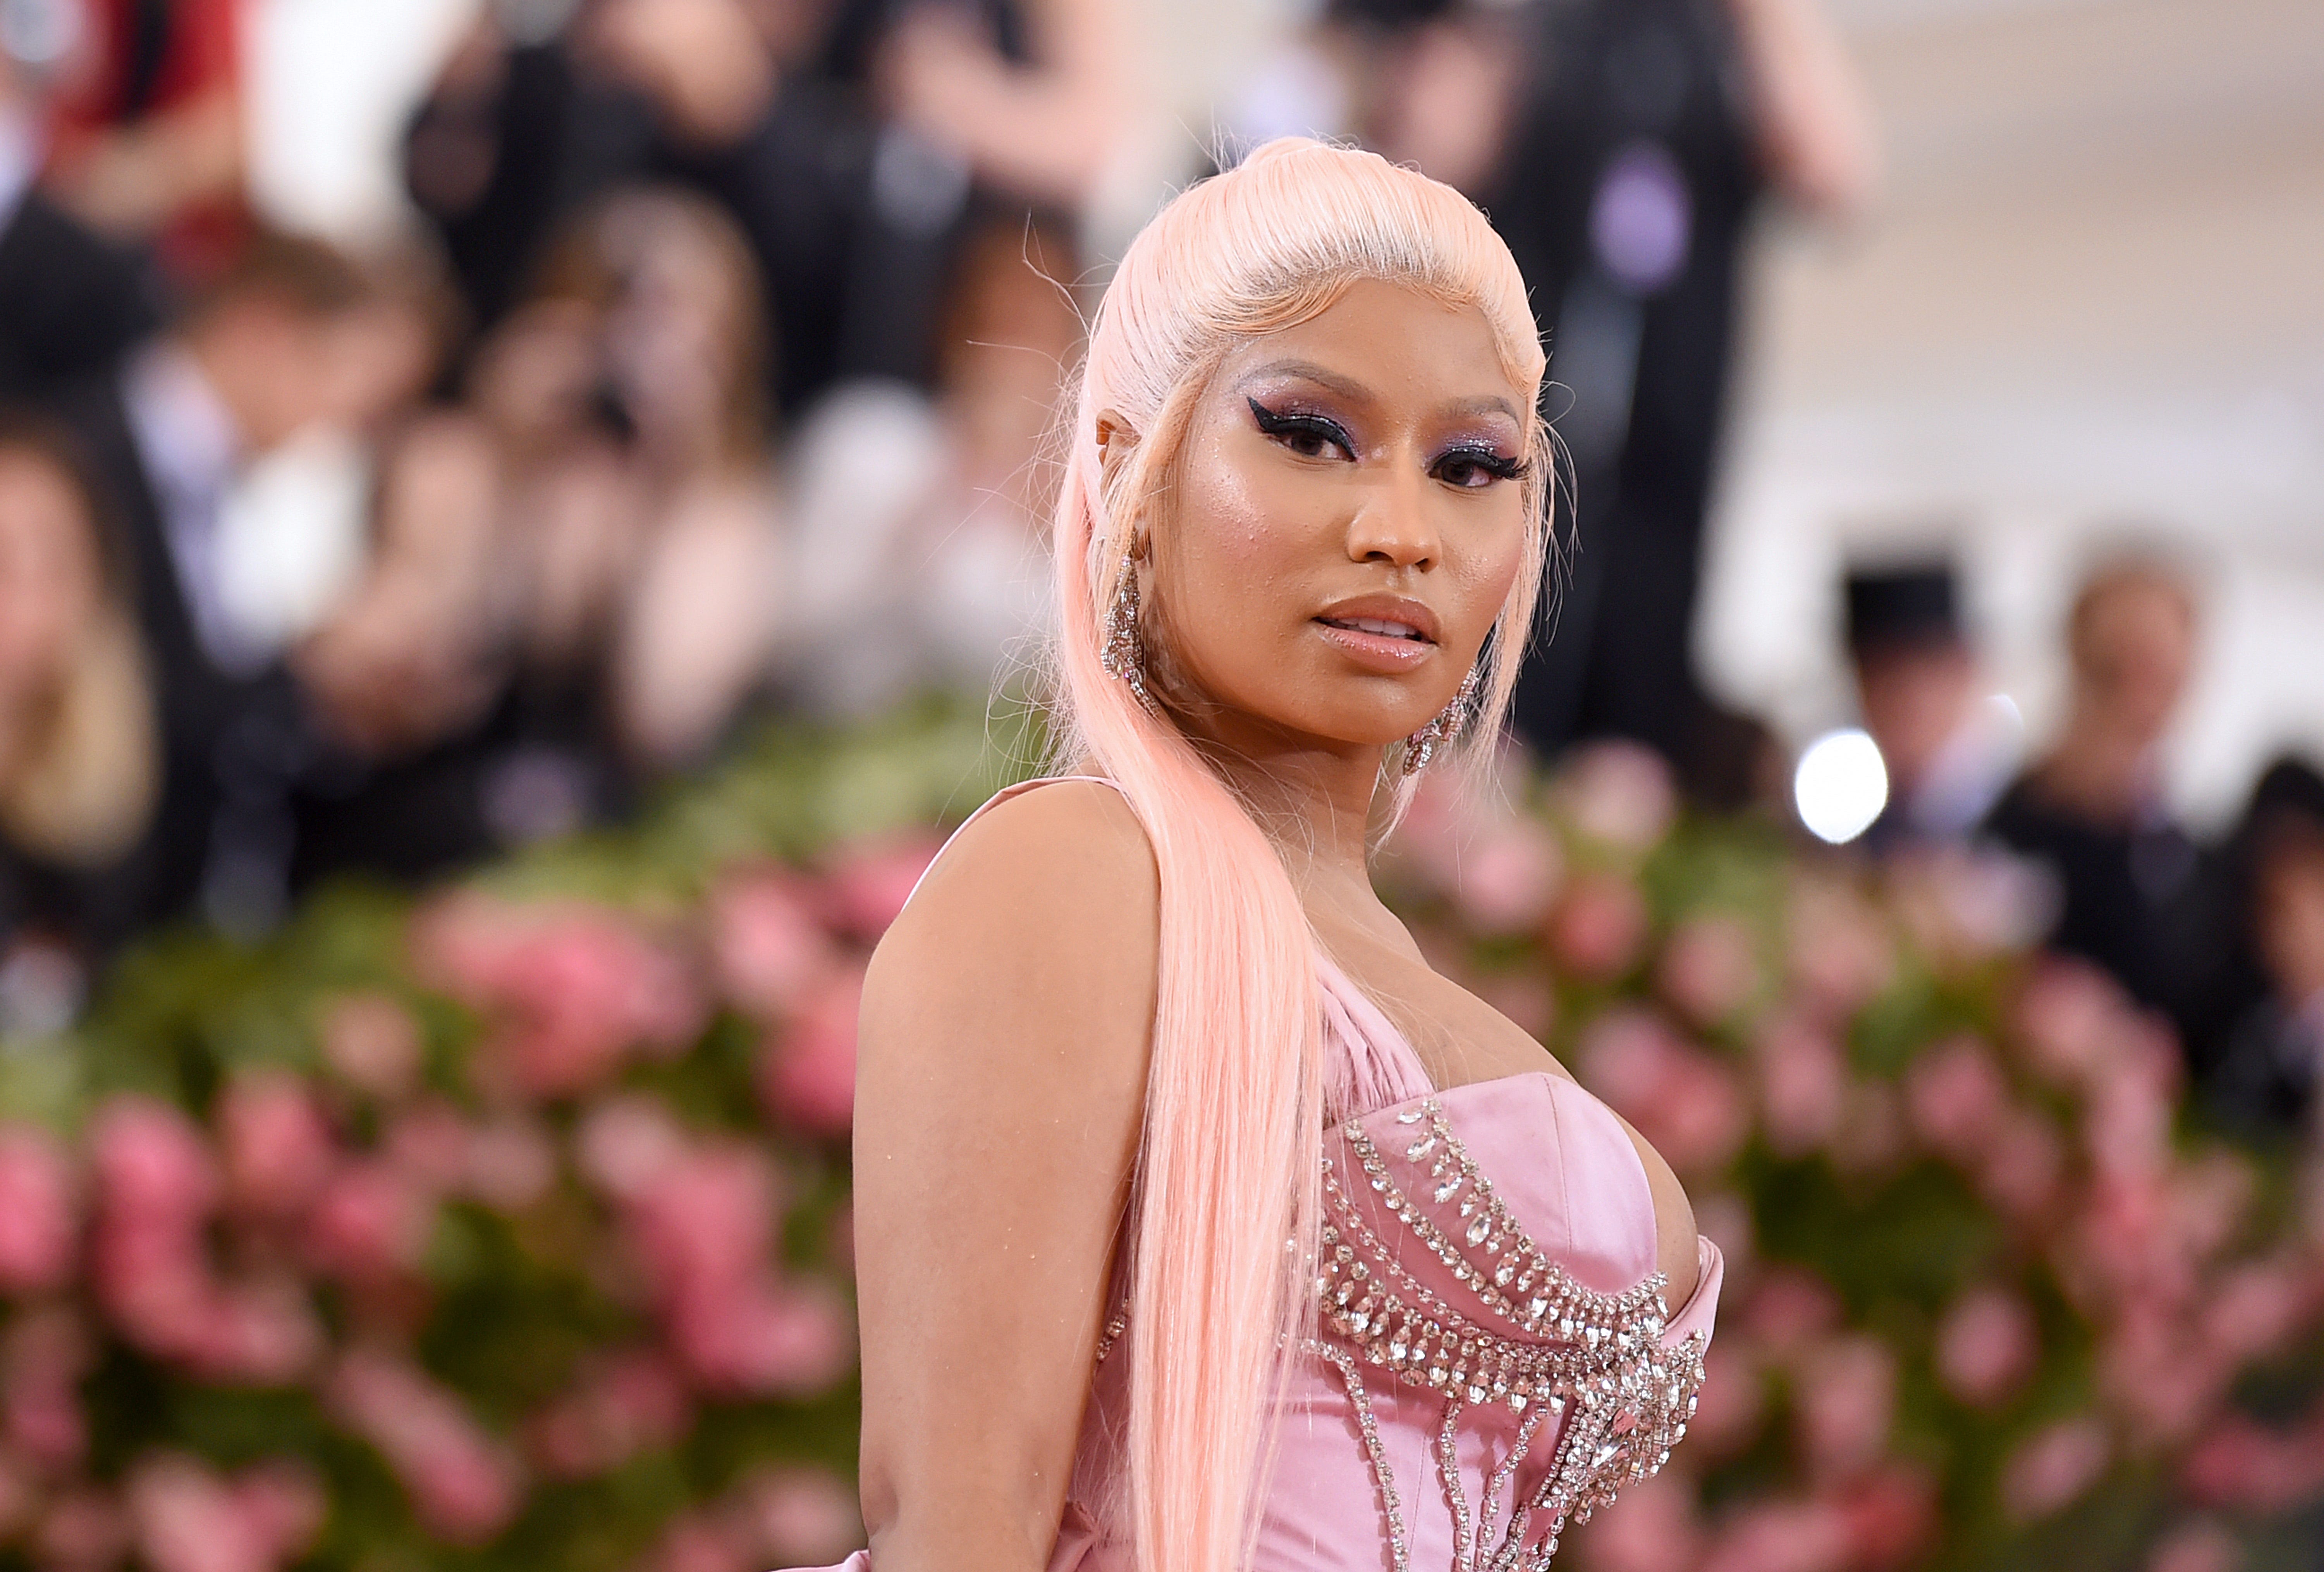 Nicki Minaj's legendary rap career has spanned more than a decade. Here are photos of the queen of rap through the years.